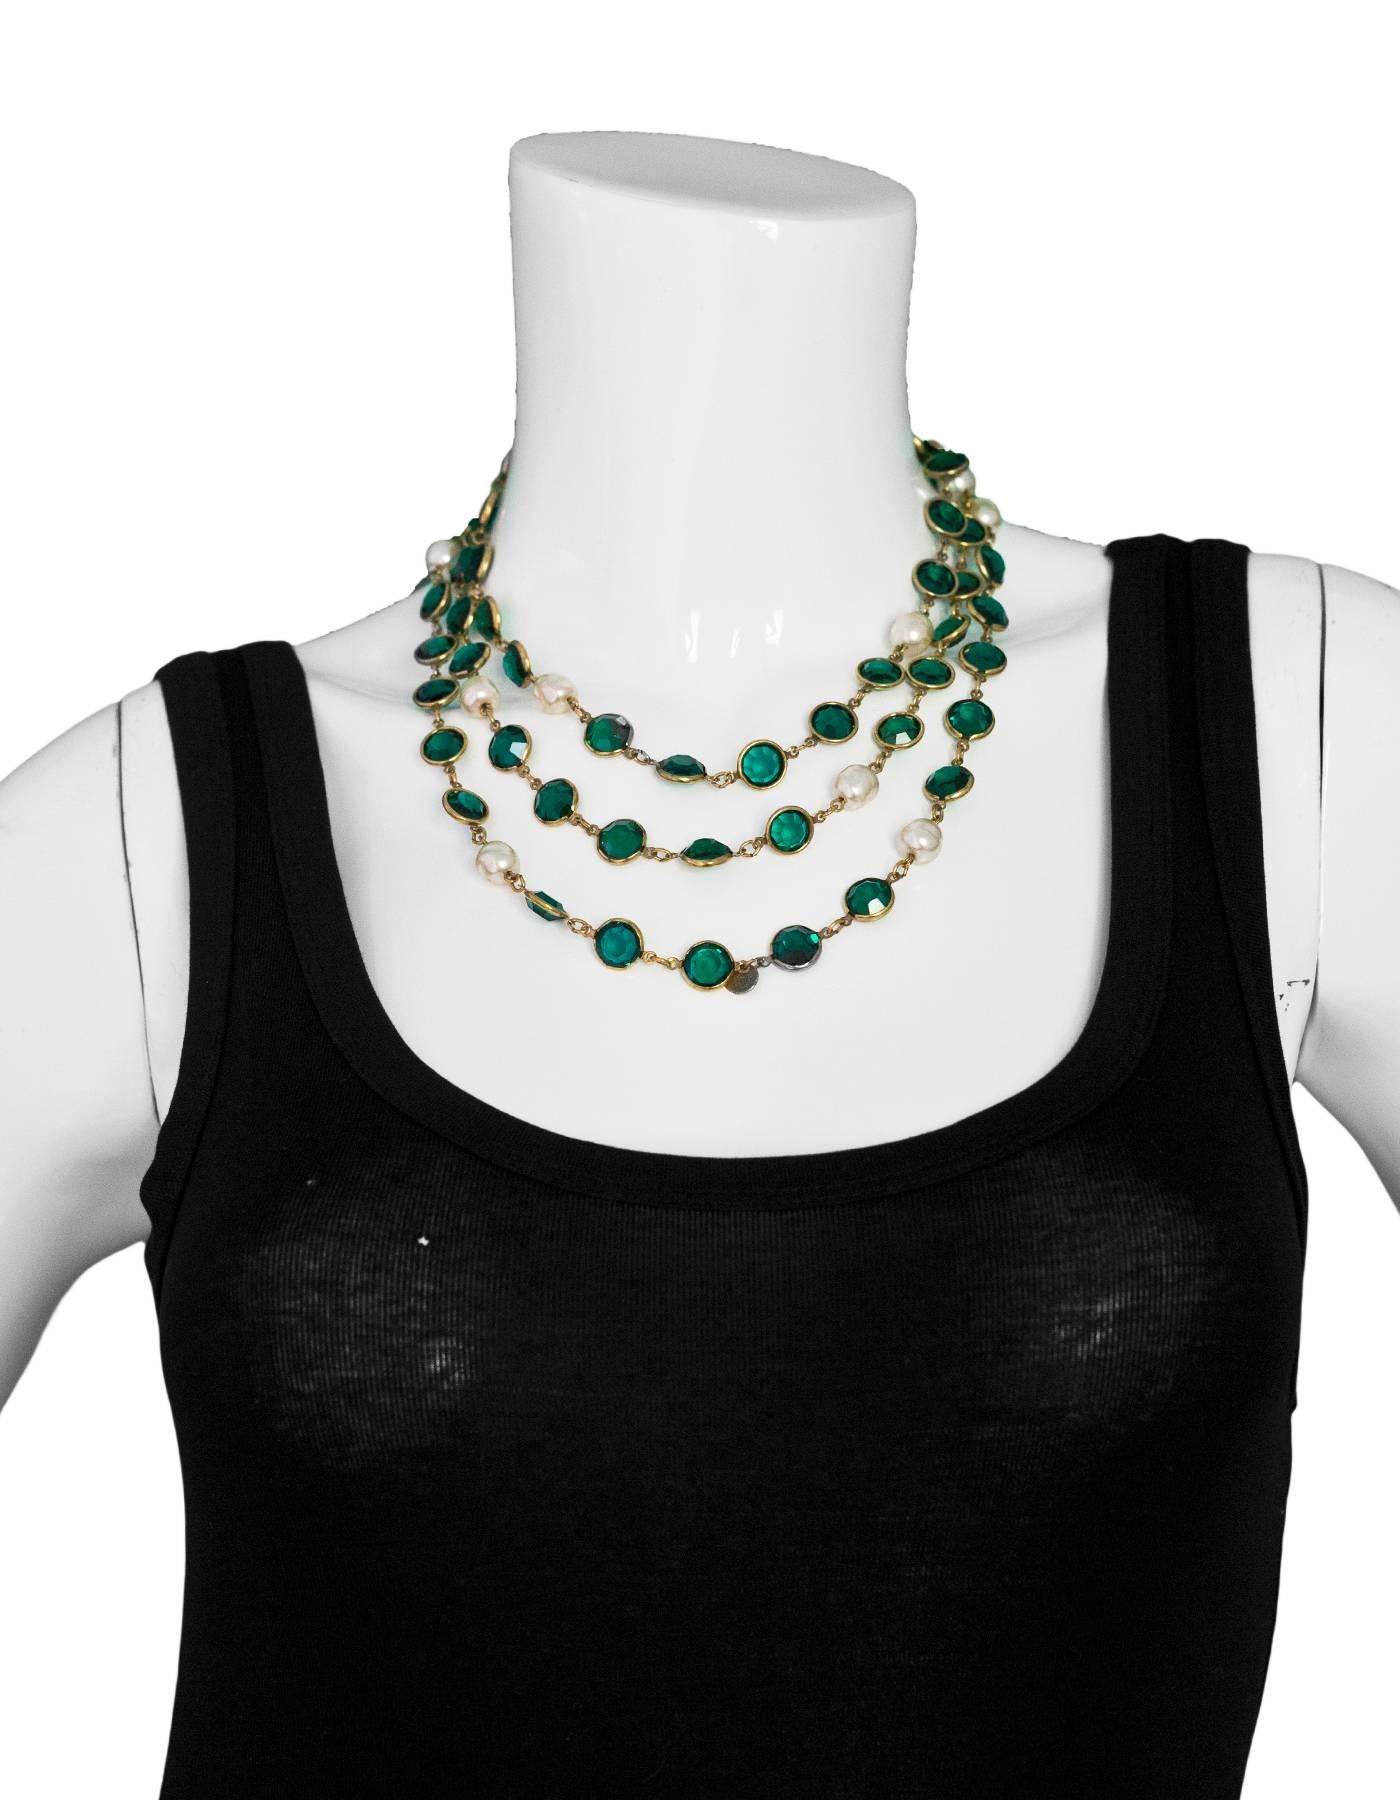 Chanel Green Crystal & Faux Pearl Sautoir Necklace

Year of Production: 1981
Color: Ivory, green, gold
Materials: Faux pearl,  crystal, metal
Closure: None
Stamp: Chanel 1981
Overall Condition: Excellent vintage pre-owned condition with the